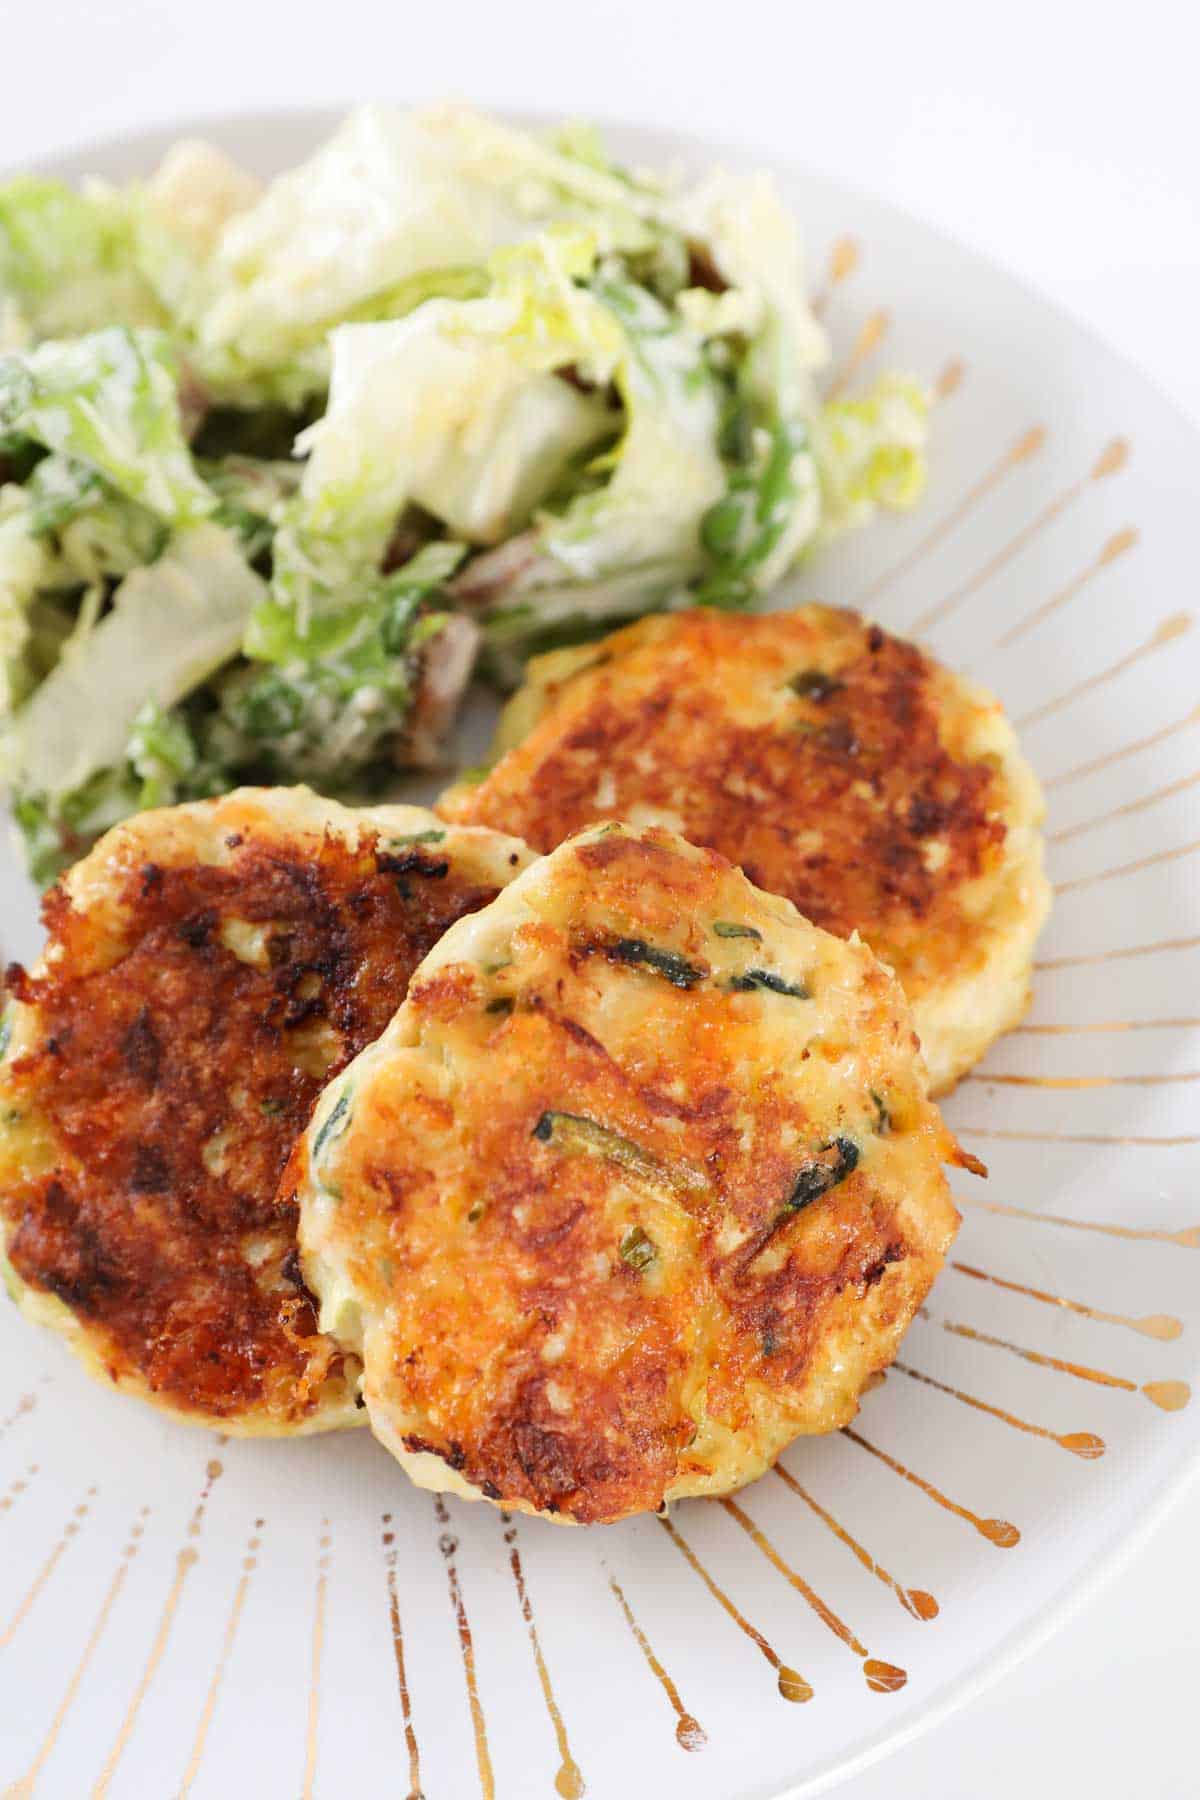 Three chicken rissoles on a plate with salad.